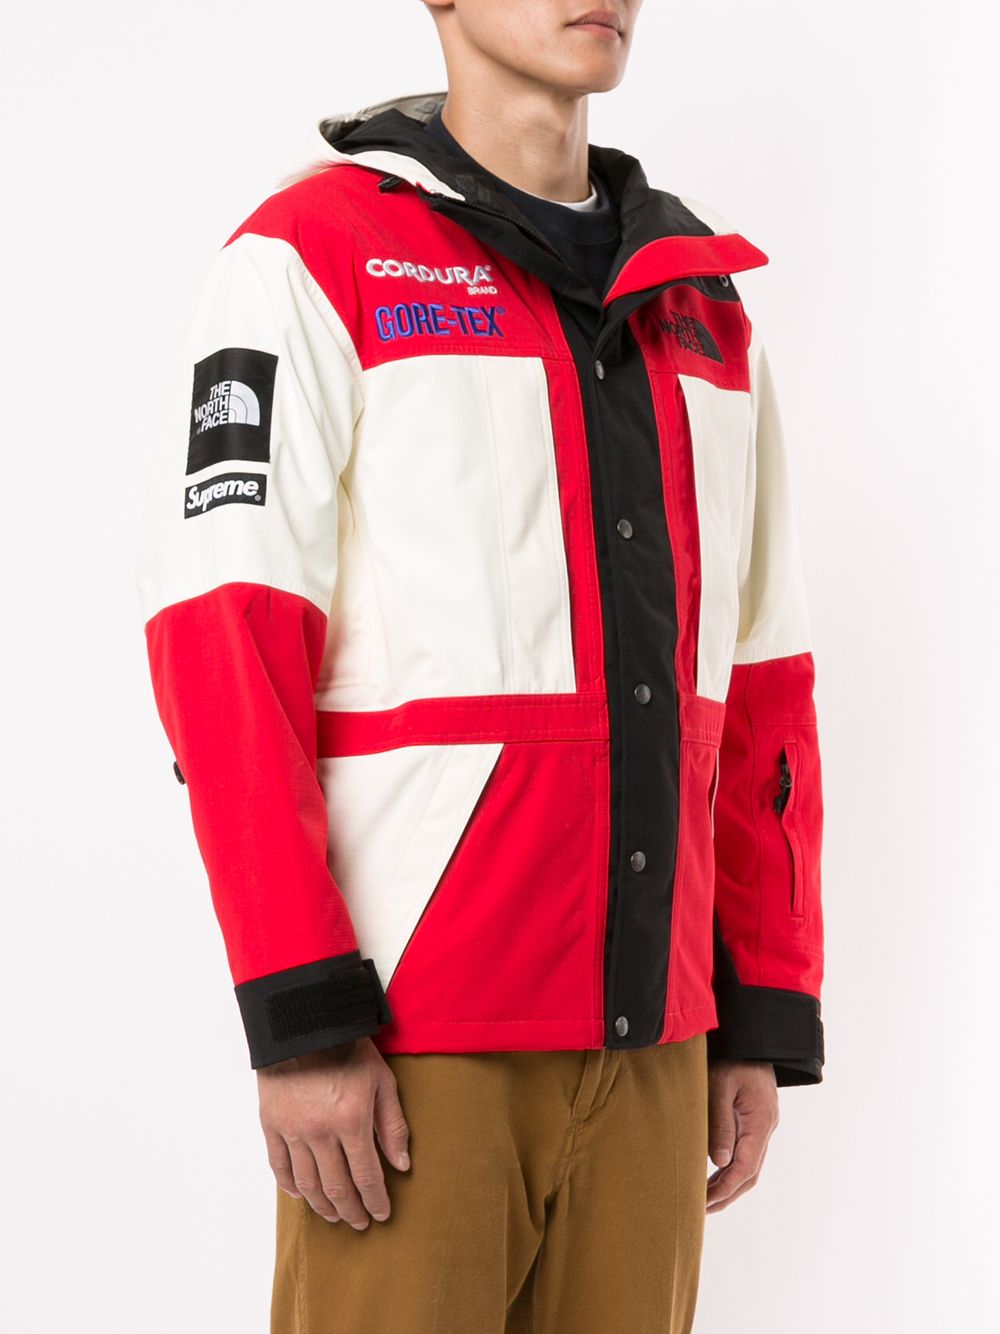 Supreme x The North Face Expedition Jacket - Farfetch